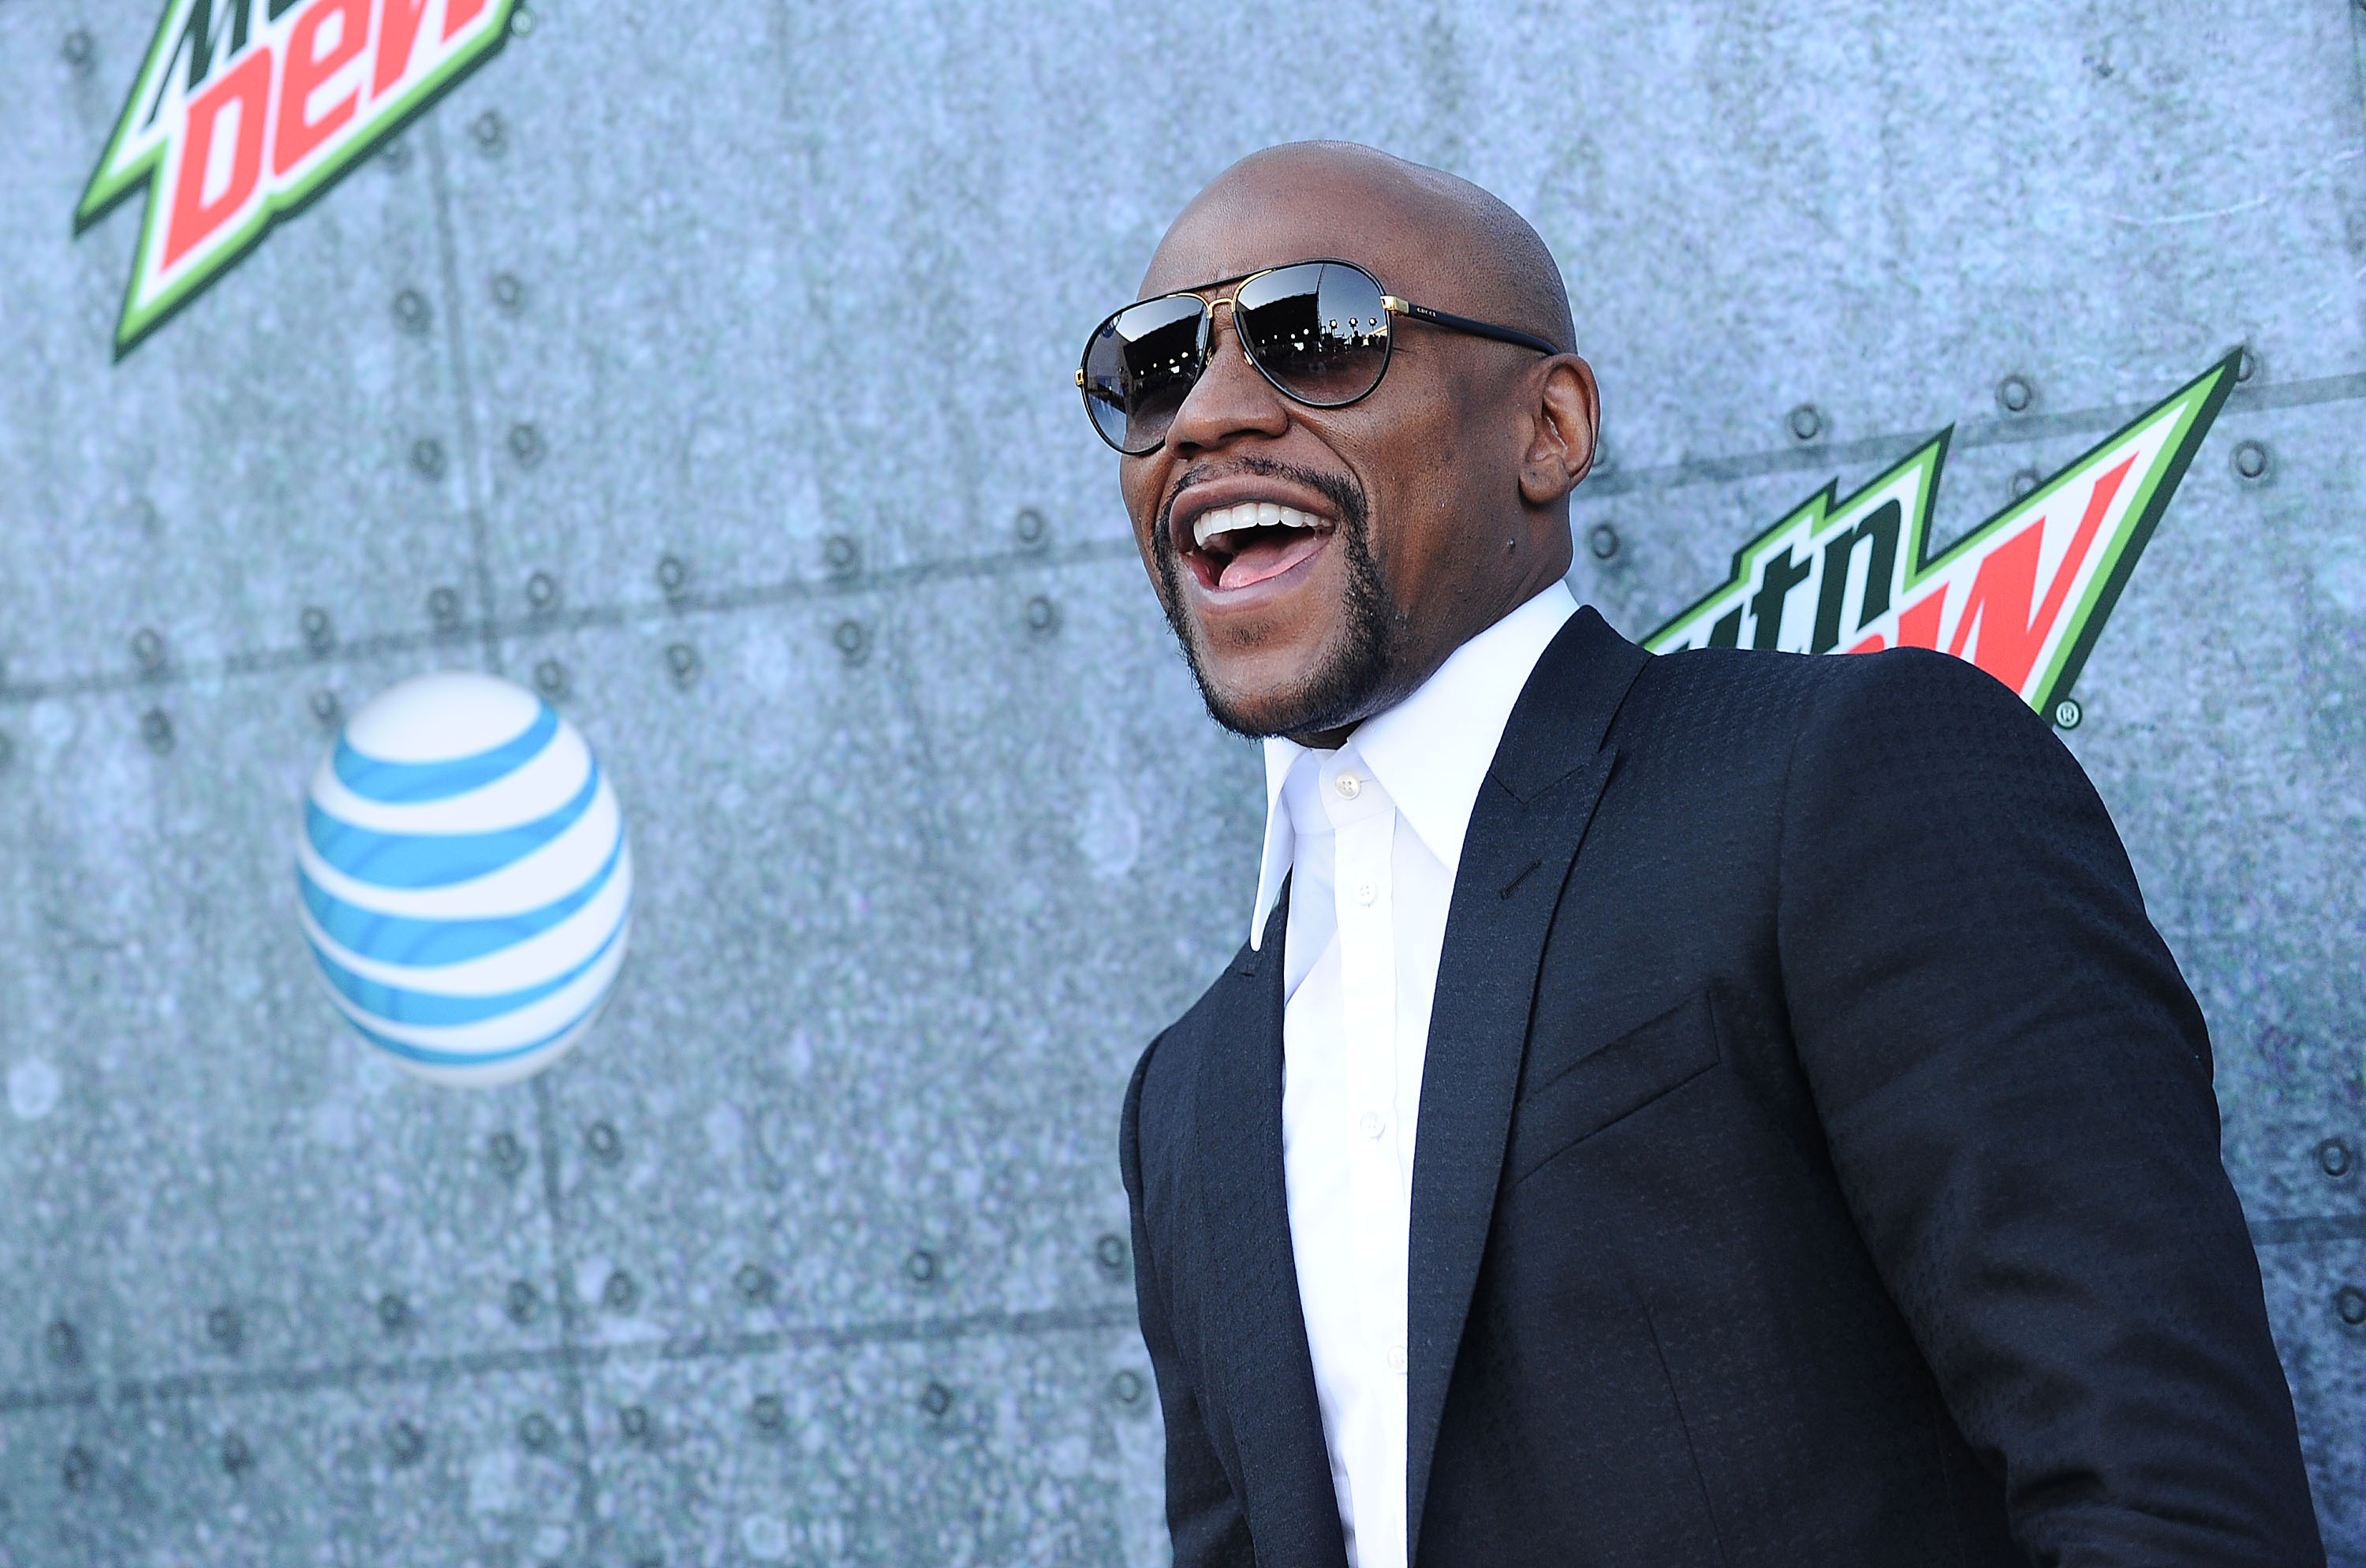 Floyd Mayweather, Jr. attends Spike TV's "Guys Choice 2015" at Sony Pictures Studios on June 6, 2015 in Culver City, California. (Jason LaVeris—FilmMagic)